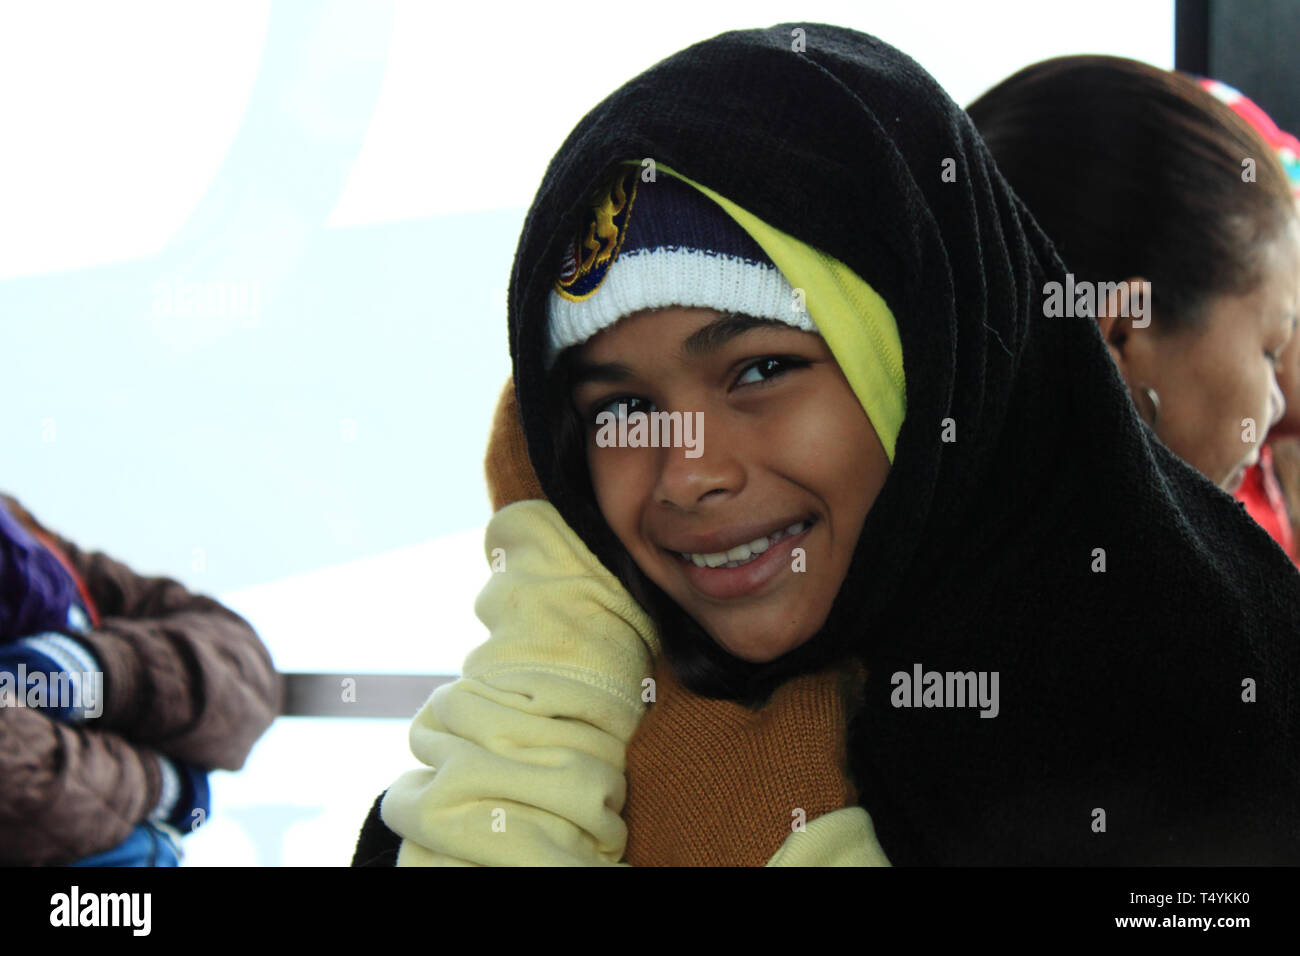 Merida, Venezuela - May 12, 2017: Portrait of a young girl in warm clothing at teleferico station. Stock Photo